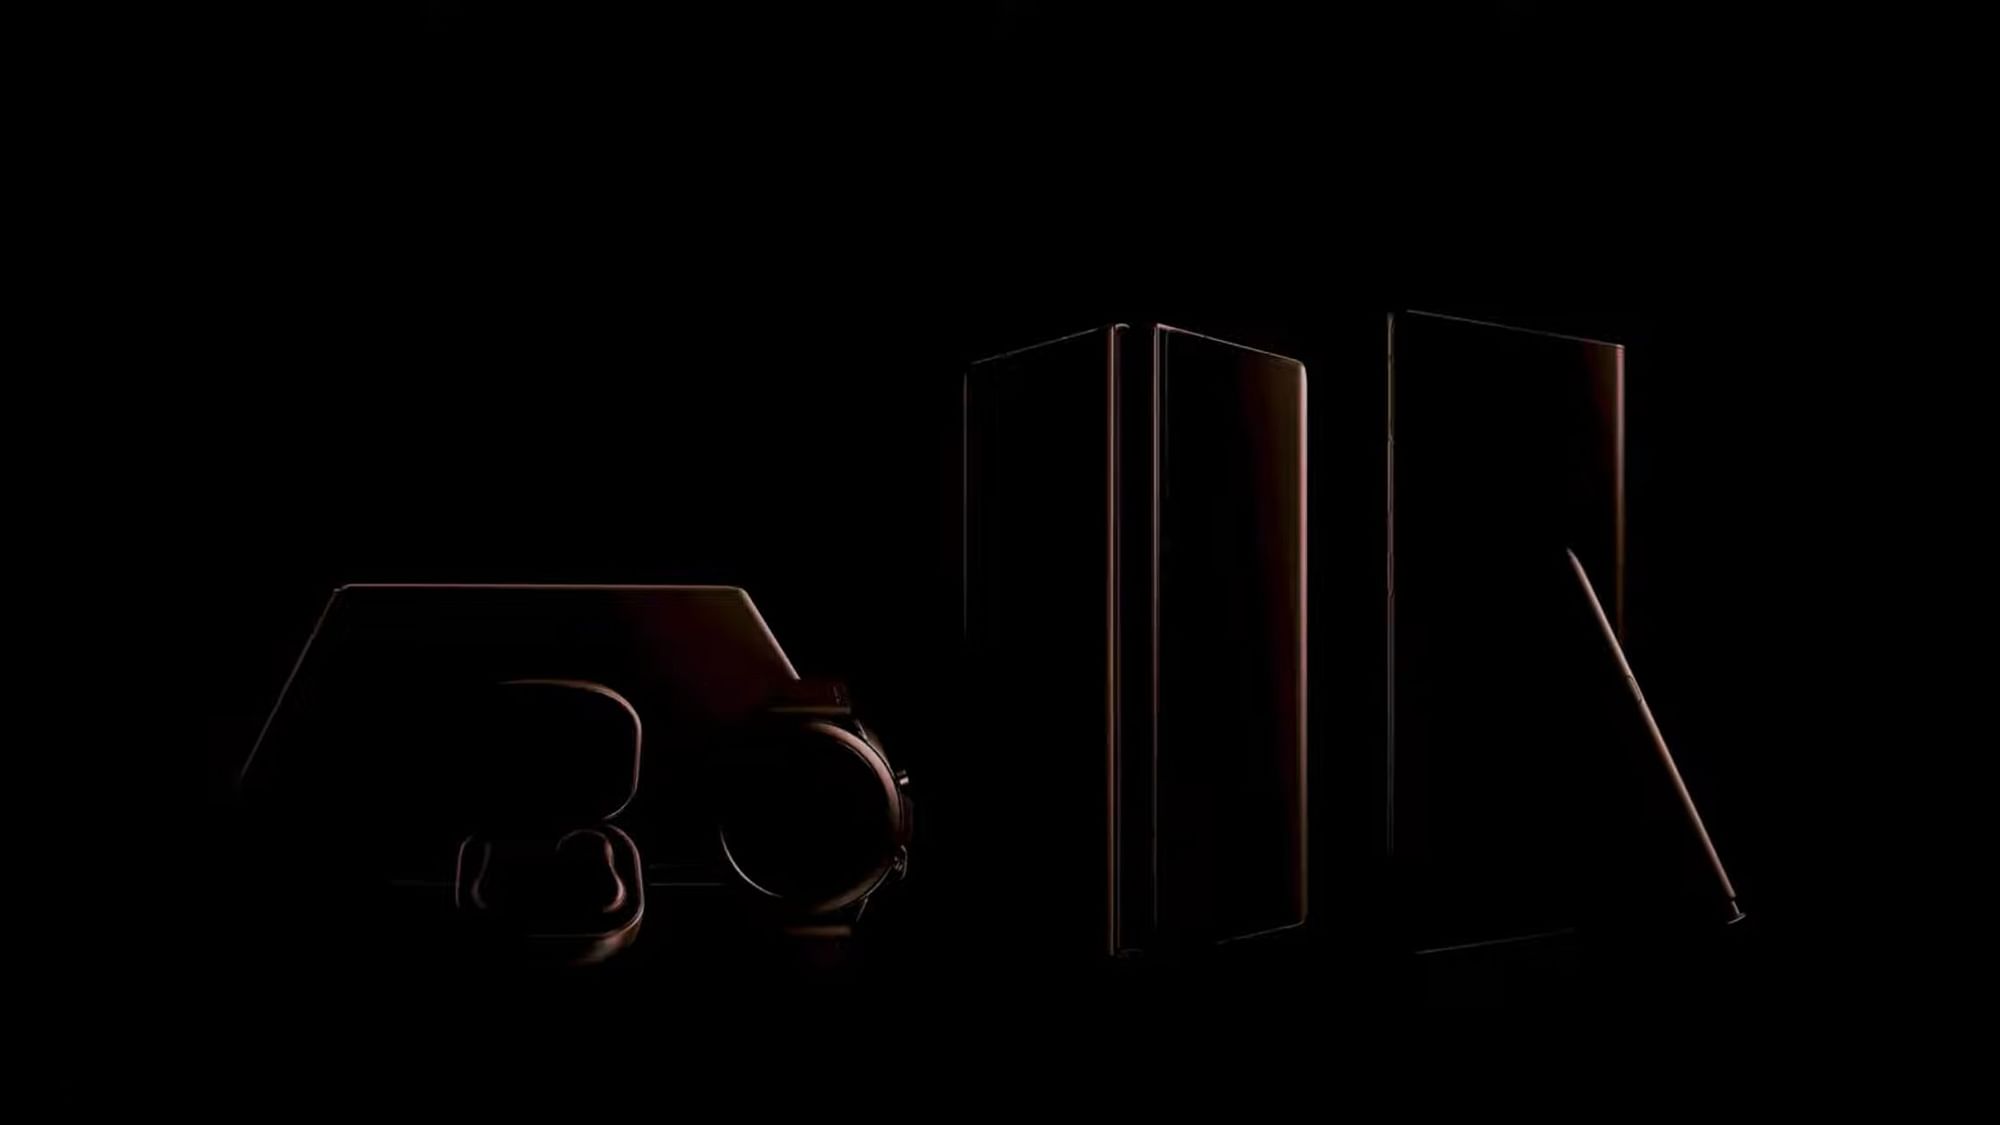 Samsung has teased that it will launch five new products at this year’s ‘Unpacked’ event.